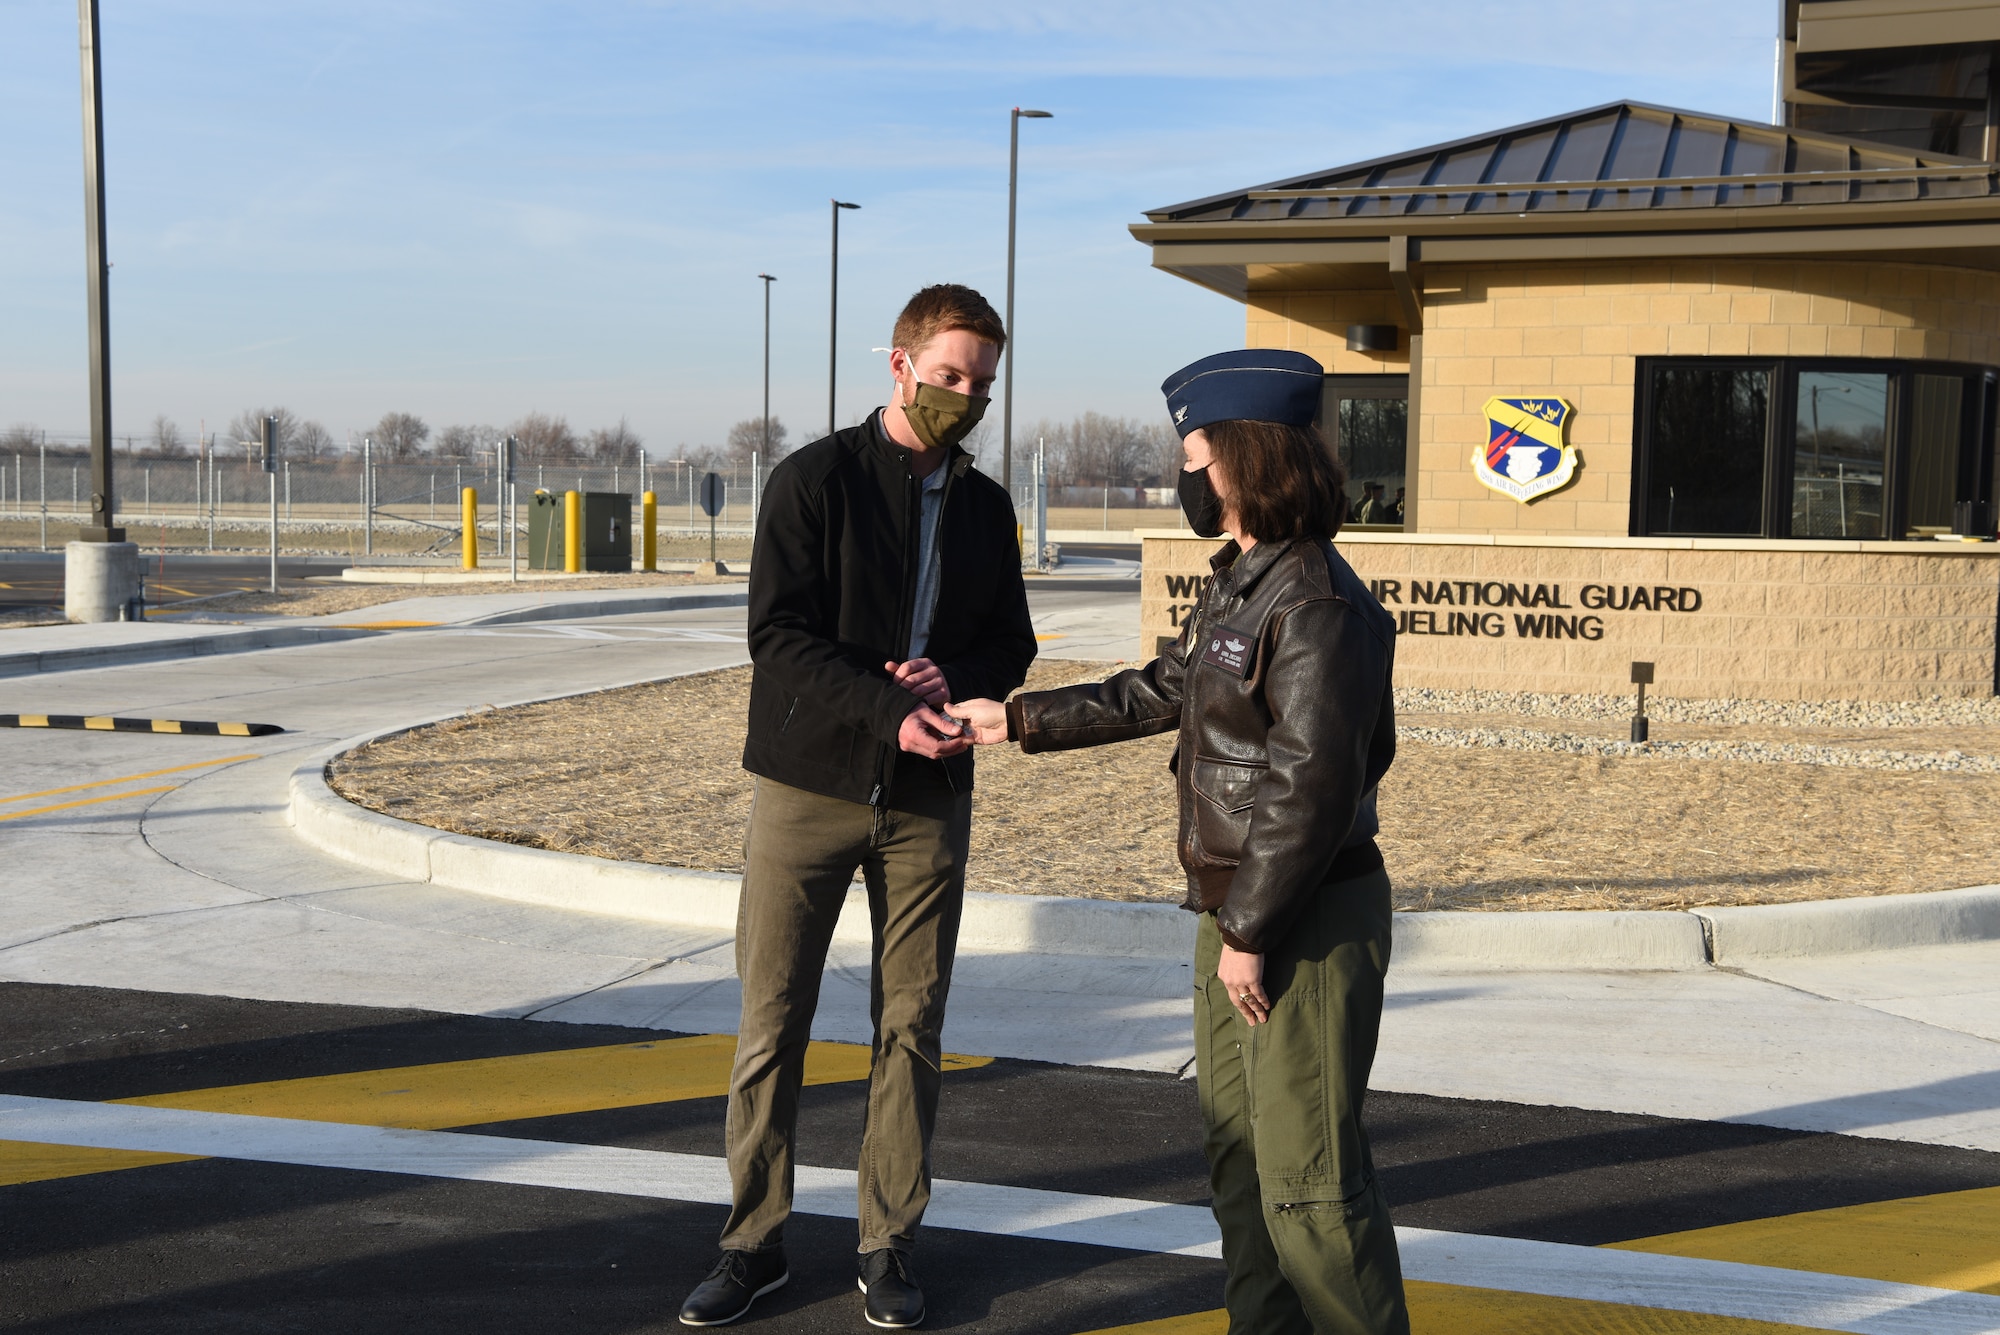 The new main gate significantly improves base defense and traffic flow. Construction of the project began in August 2019 and cost approximately $4.4 million to complete. National Guard Bureau funded the entirety of the project.